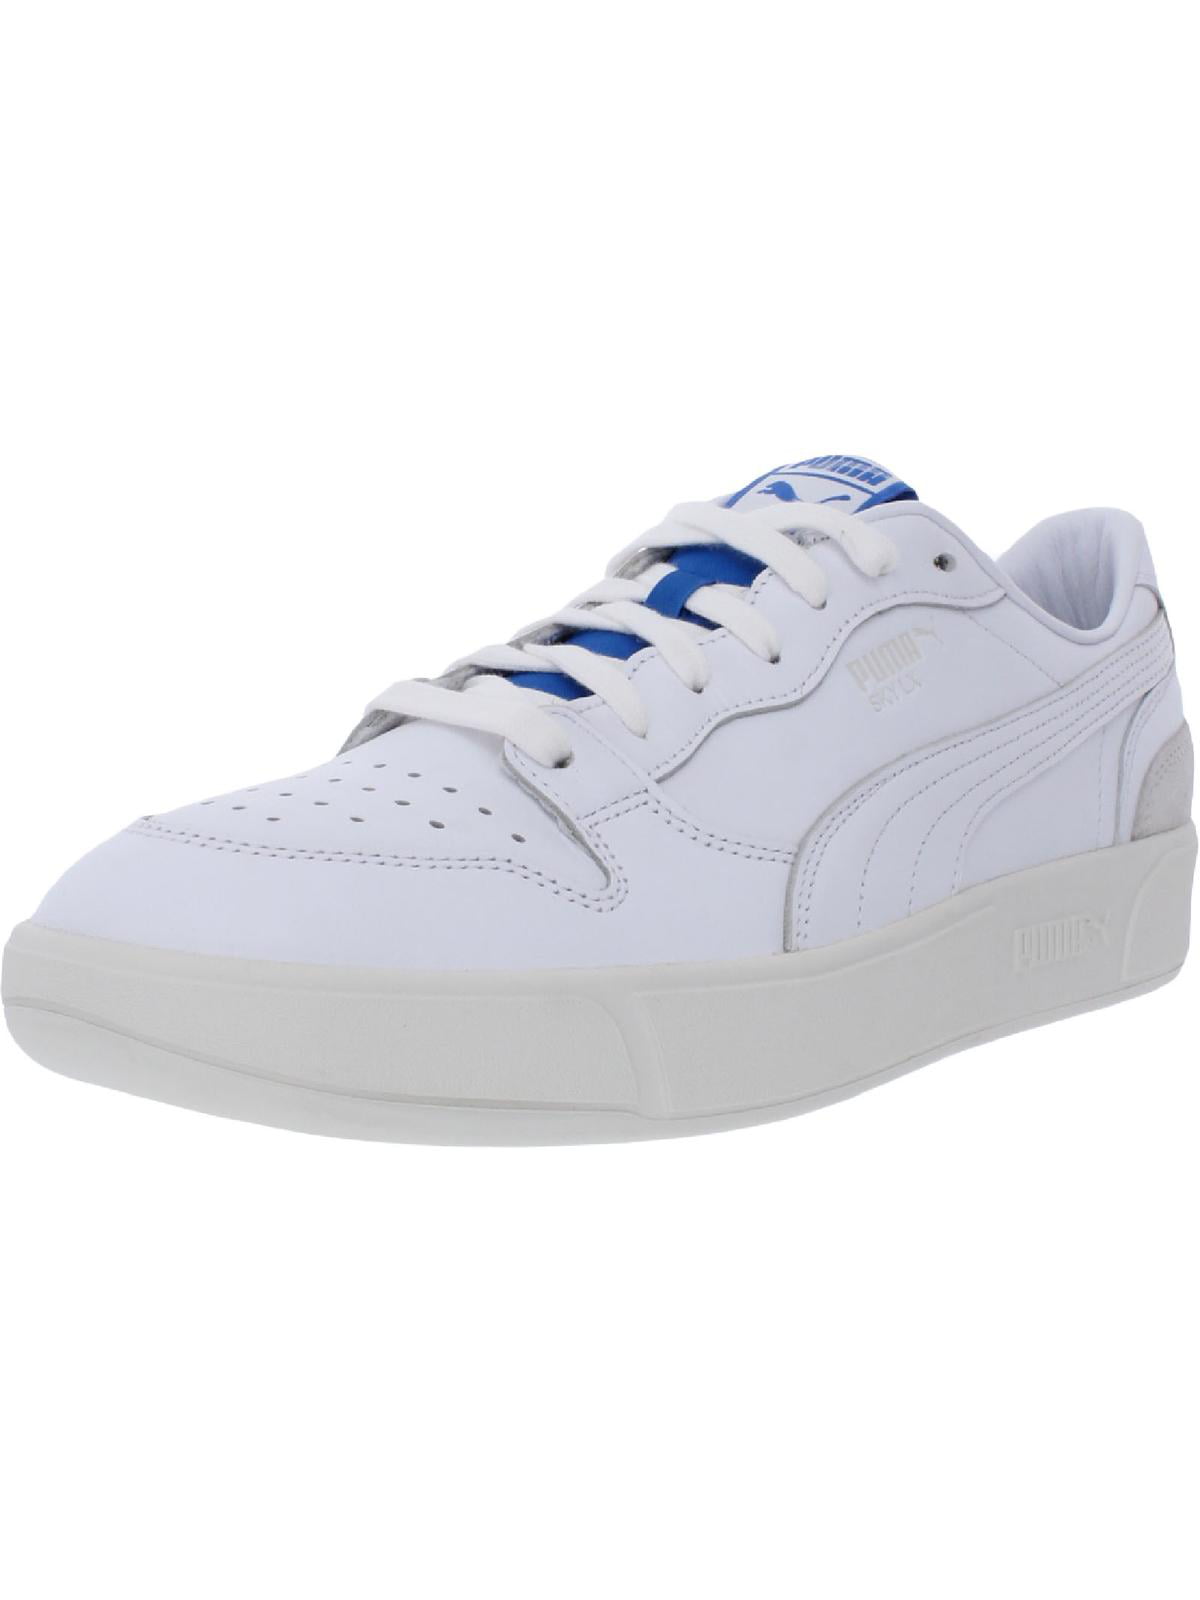 B,M Tommy Hilfiger Womens Lamiss Casual and Fashion Sneakers White 8 Medium 